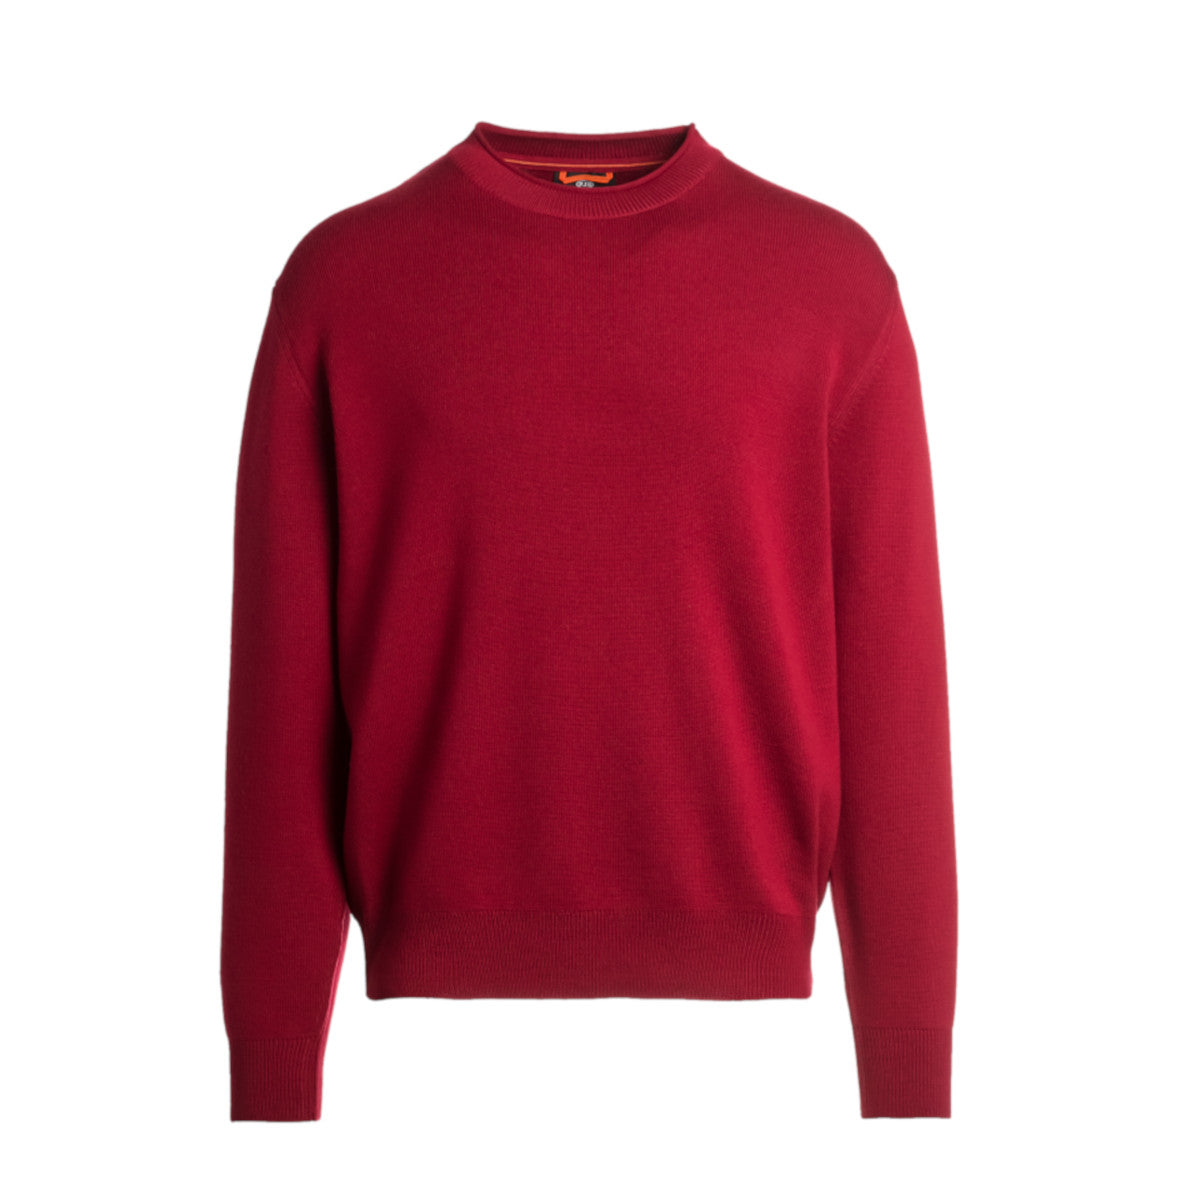 Parajumpers Wallace Crew Neck Knitwear 310 Rio Red